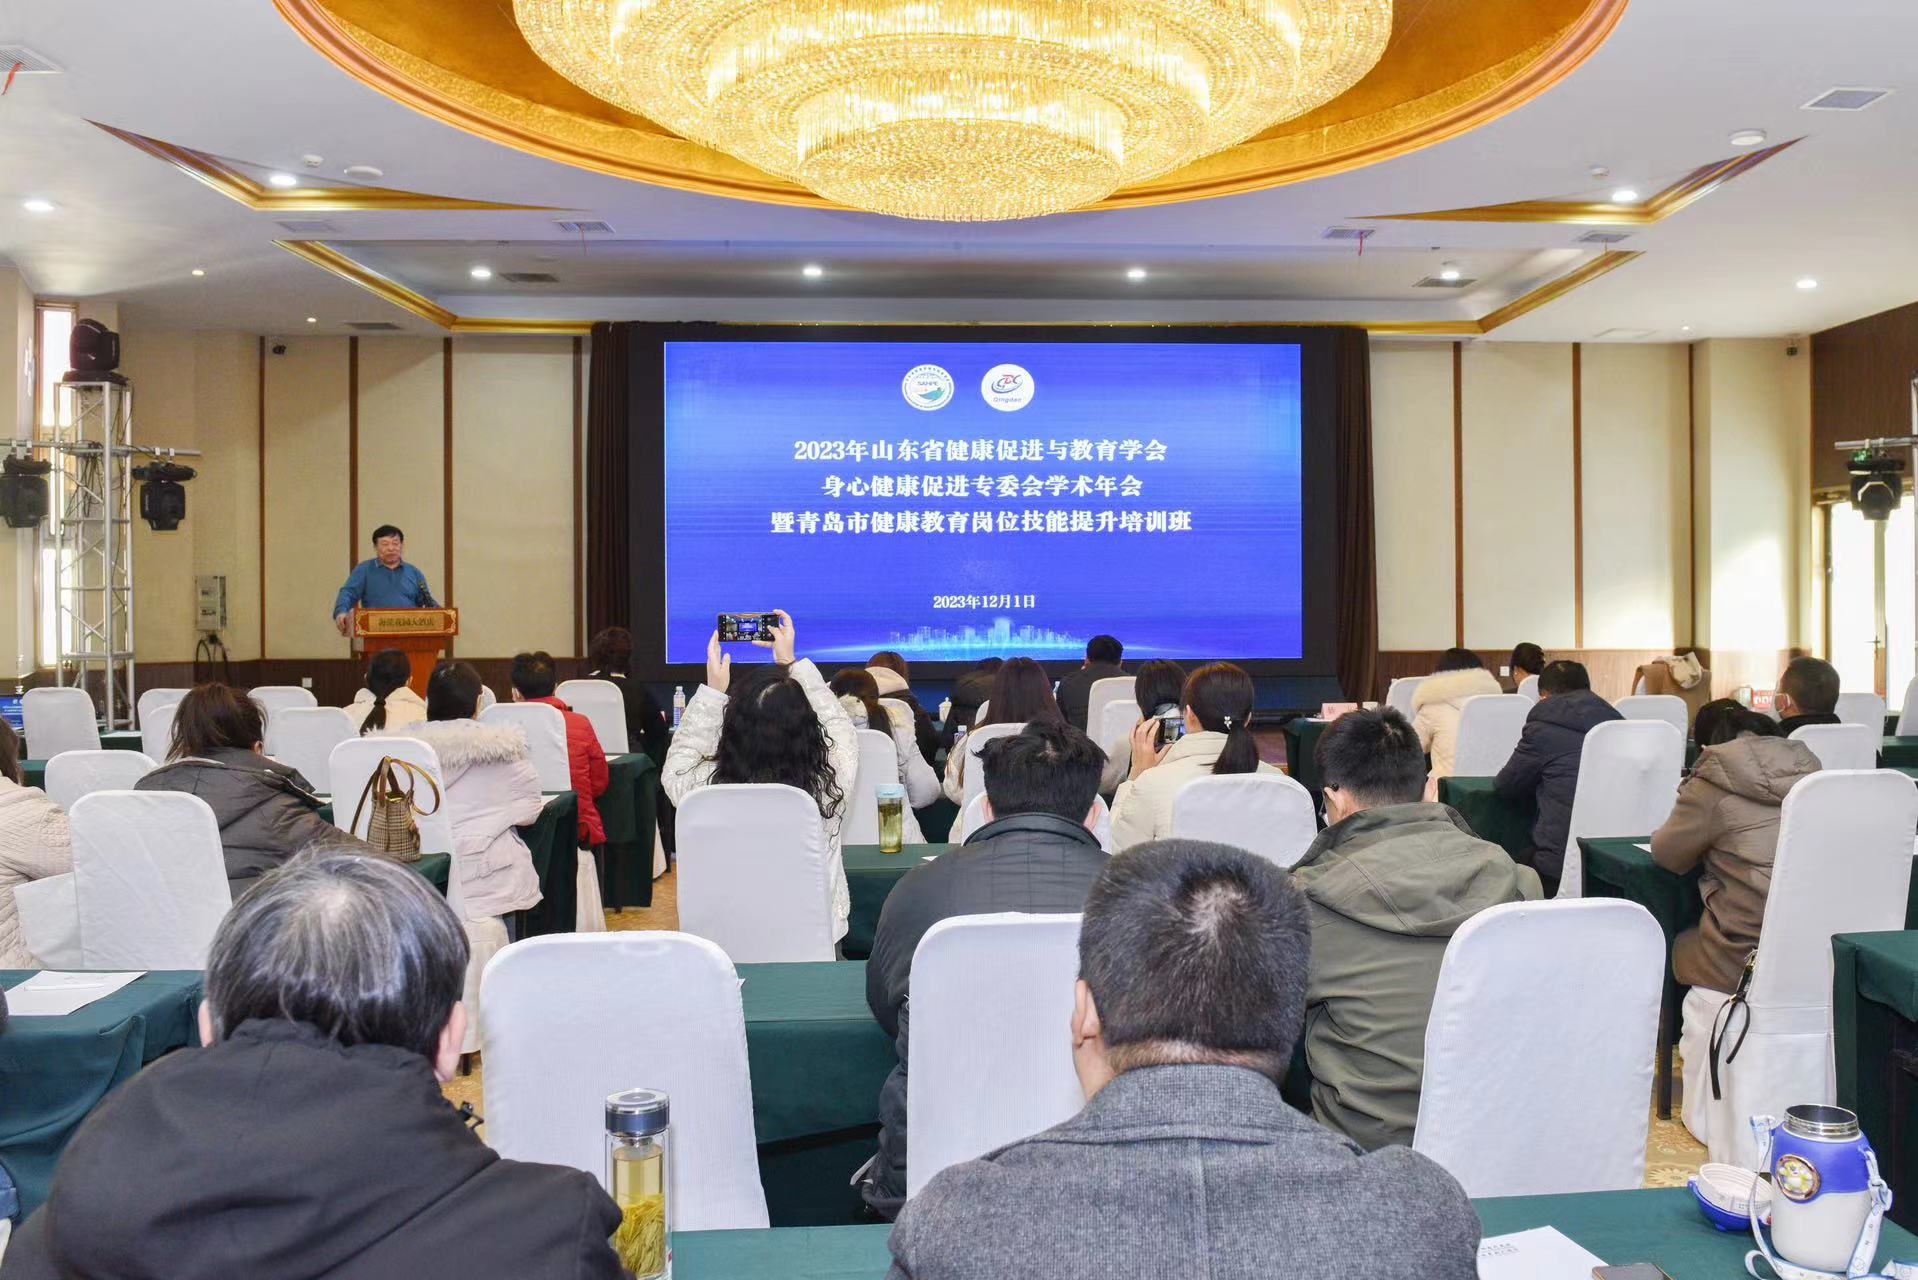 Shandong Province Health Promotion and Education Society of Physical and mental Health Promotion Professional Committee Academic Annual Conference was held